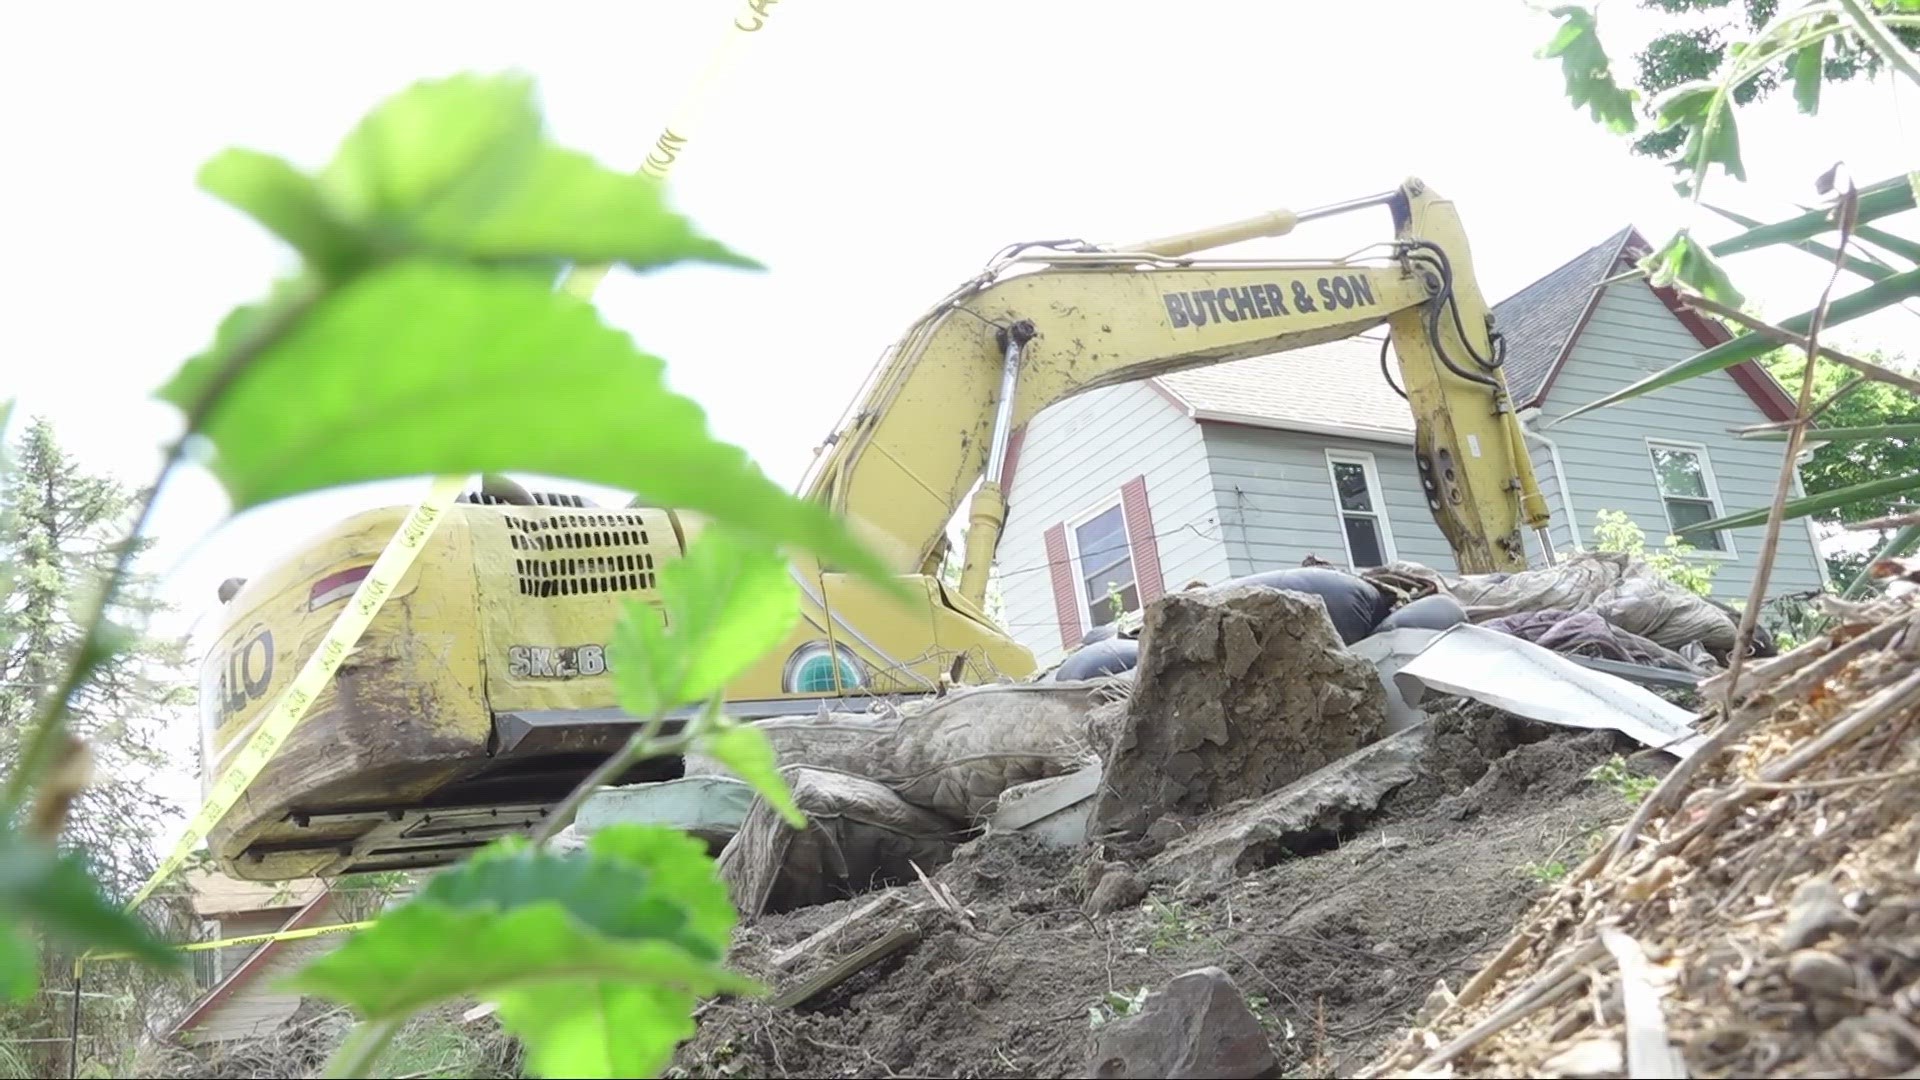 Human remains were found in a vacant house that was demolished in Akron on Thursday.